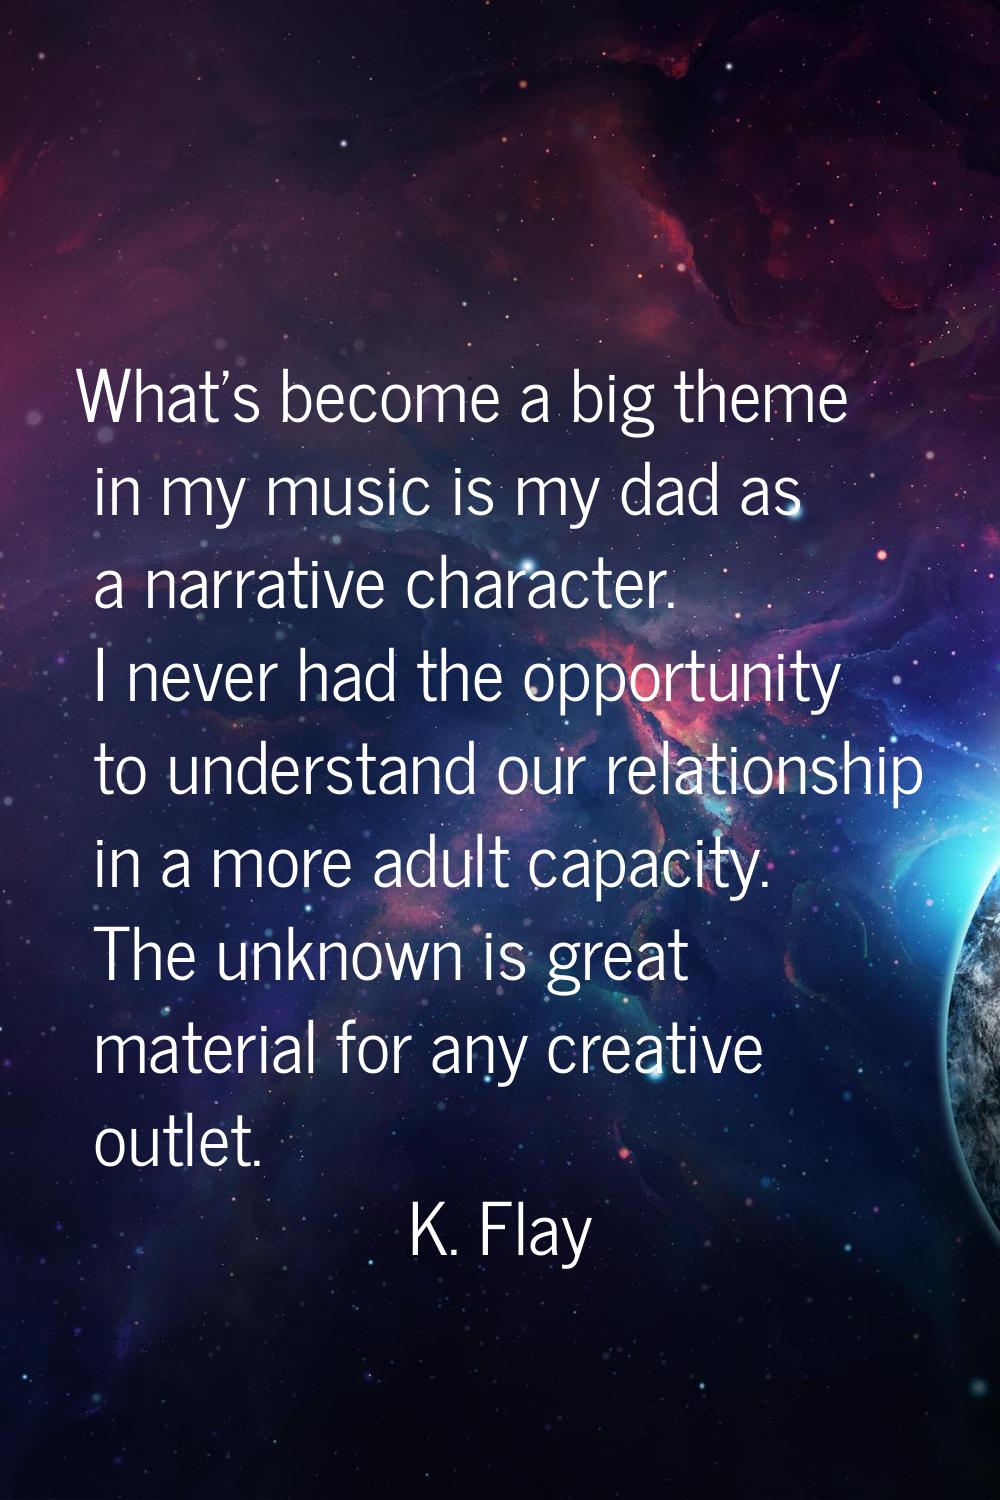 What's become a big theme in my music is my dad as a narrative character. I never had the opportuni